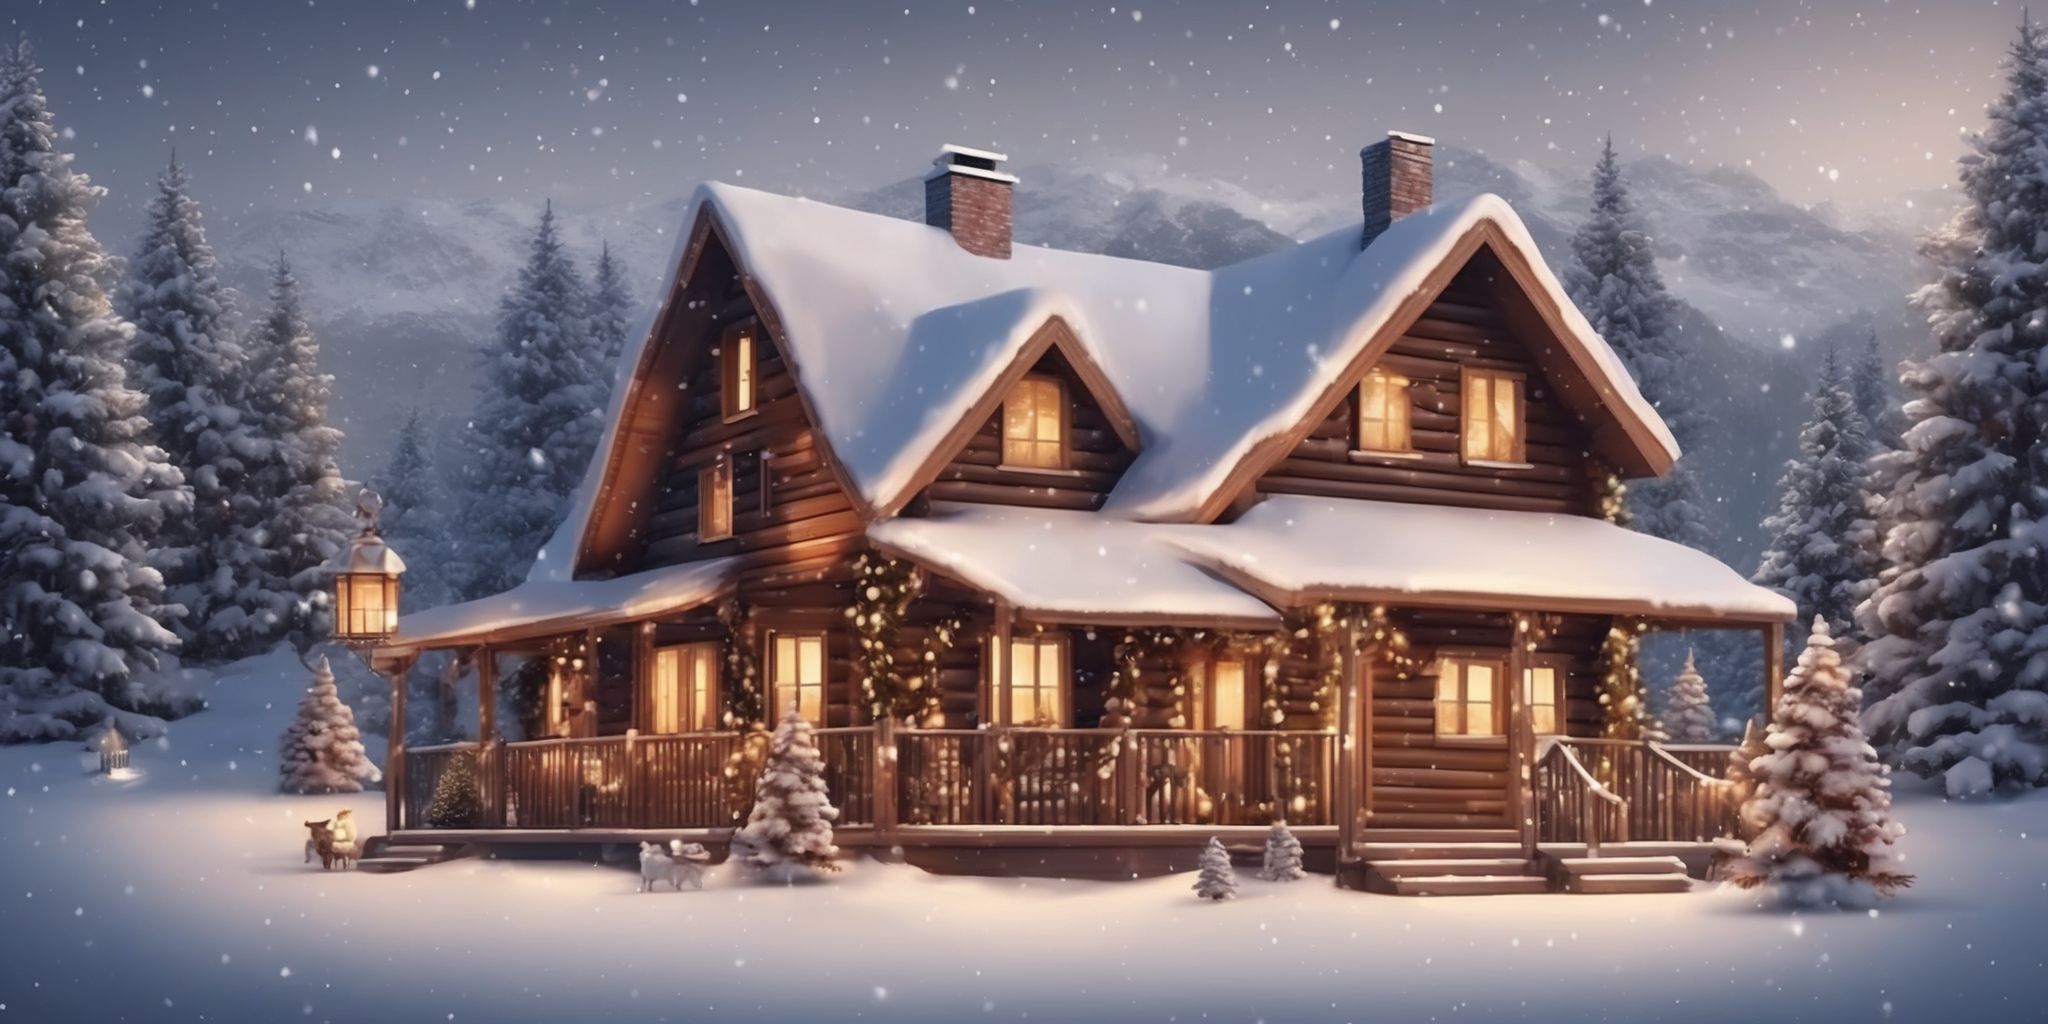 Cabin in realistic Christmas style